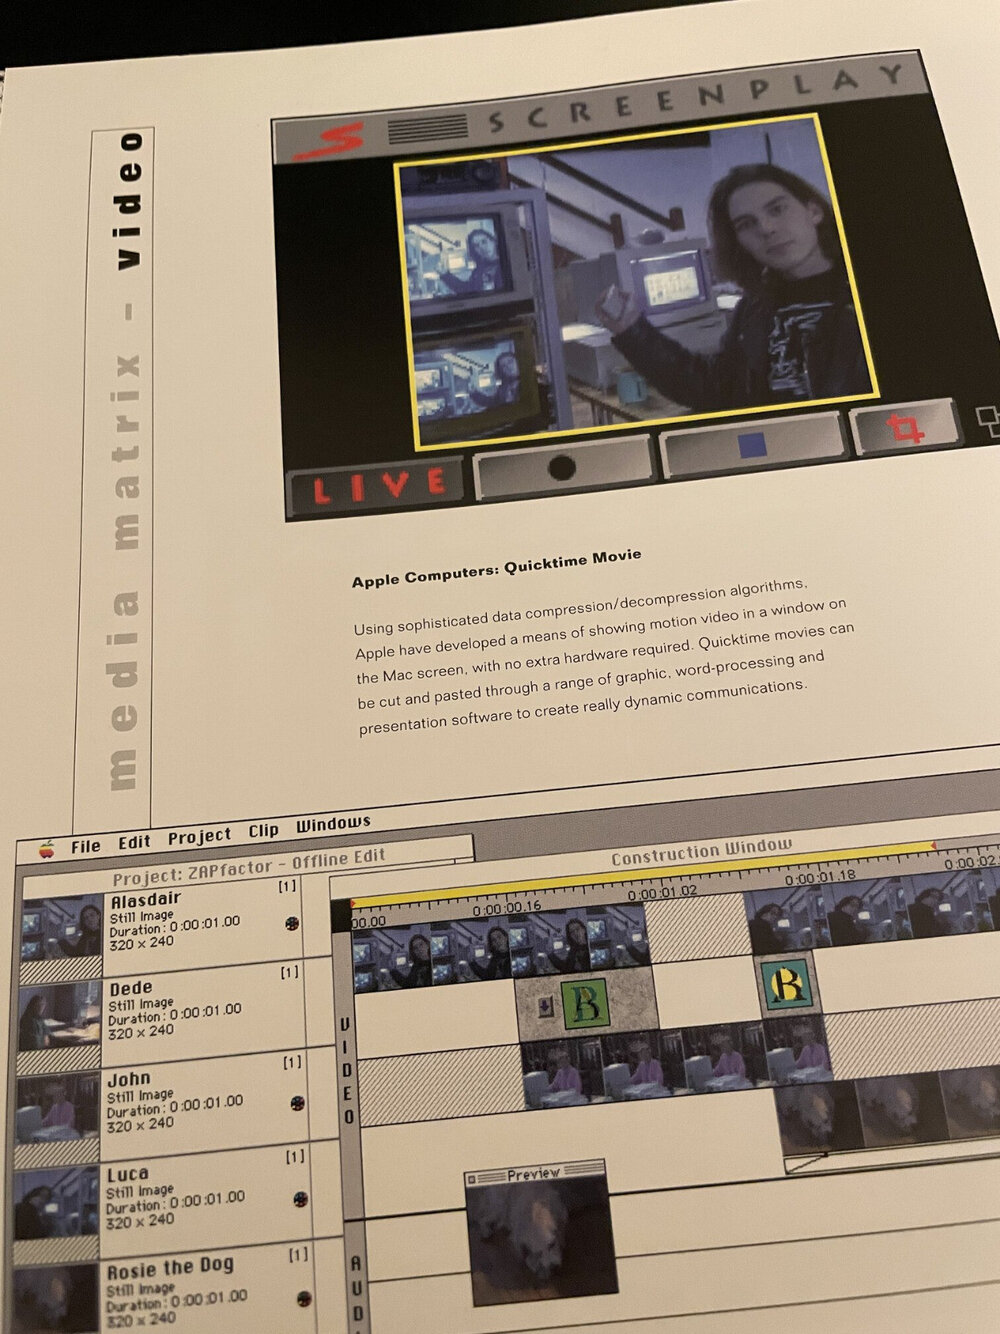 Images of Quicktime video-editing software on an old version of Mac OS. Caption: "Using sophisticated data compression/decompression algorithms, Apple have developed a means of showing motion video in a window on the Mac screen, with no extra hardware required. Quicktime movies can be cut and pasted through a range of graphic, word-processing and presentation software to create really dynamic communications."